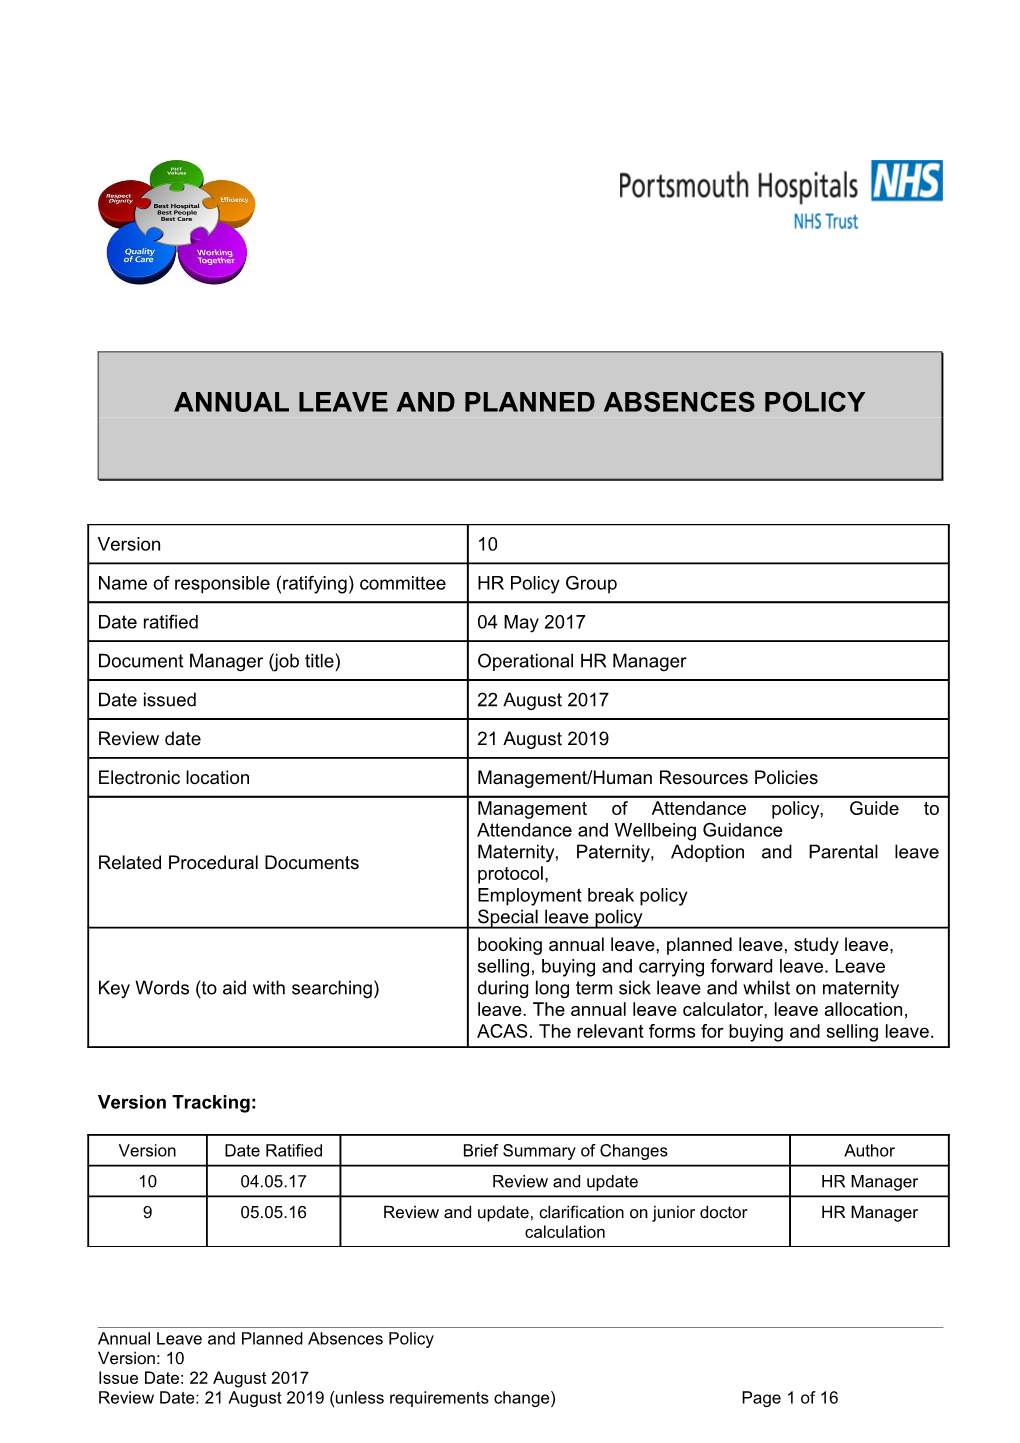 Annual Leave and Planned Absences Policy